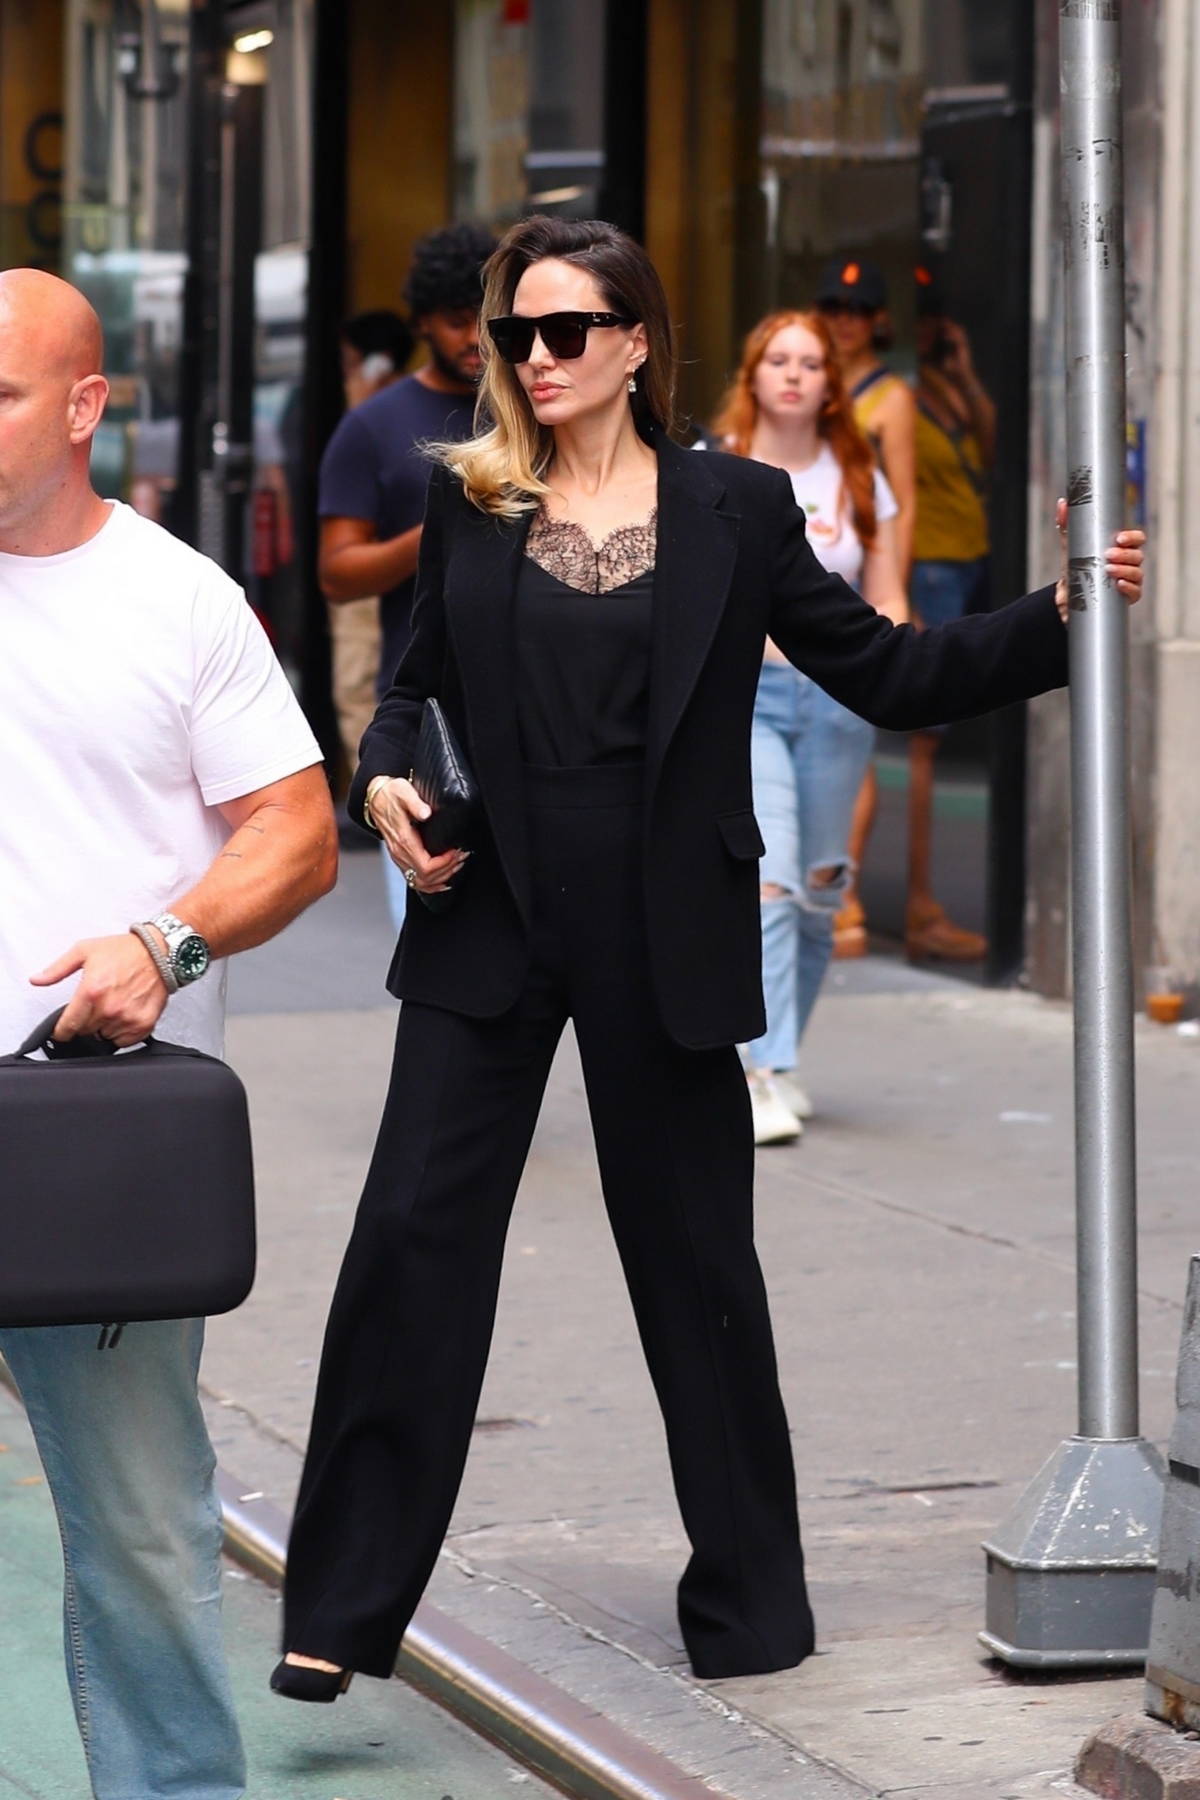 Angelina Jolie looks classy as ever in black pantsuit while stepping out  for a business meeting